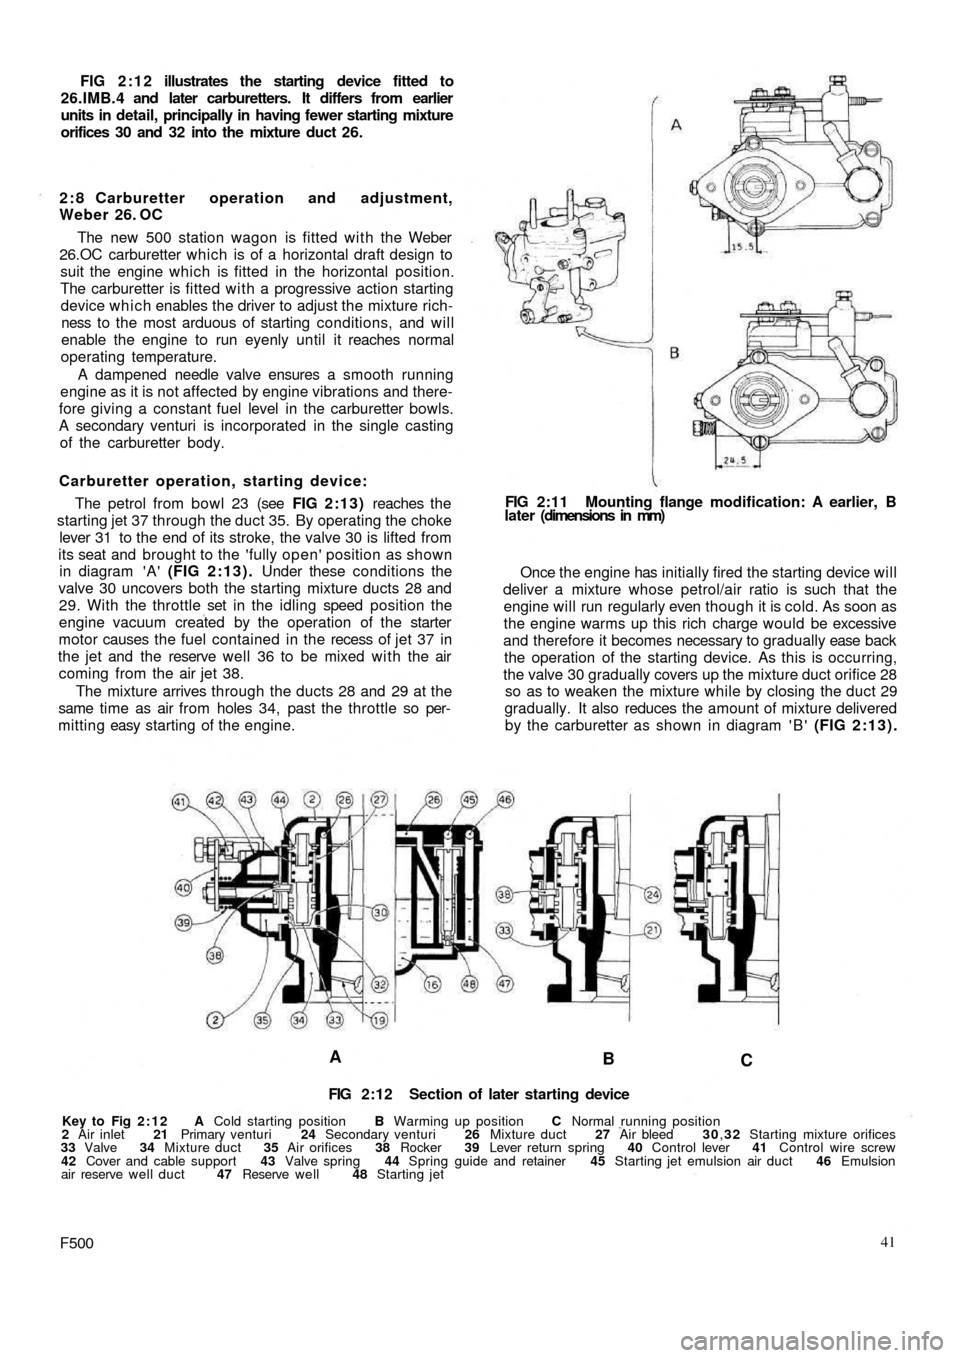 FIAT 500 1971 1.G Owners Guide FIG 2:12 illustrates the starting device fitted to
26.IMB.4 and later carburetters. It differs from earlier
units in detail, principally in having fewer starting mixture
orifices 30 and 32 into the mi